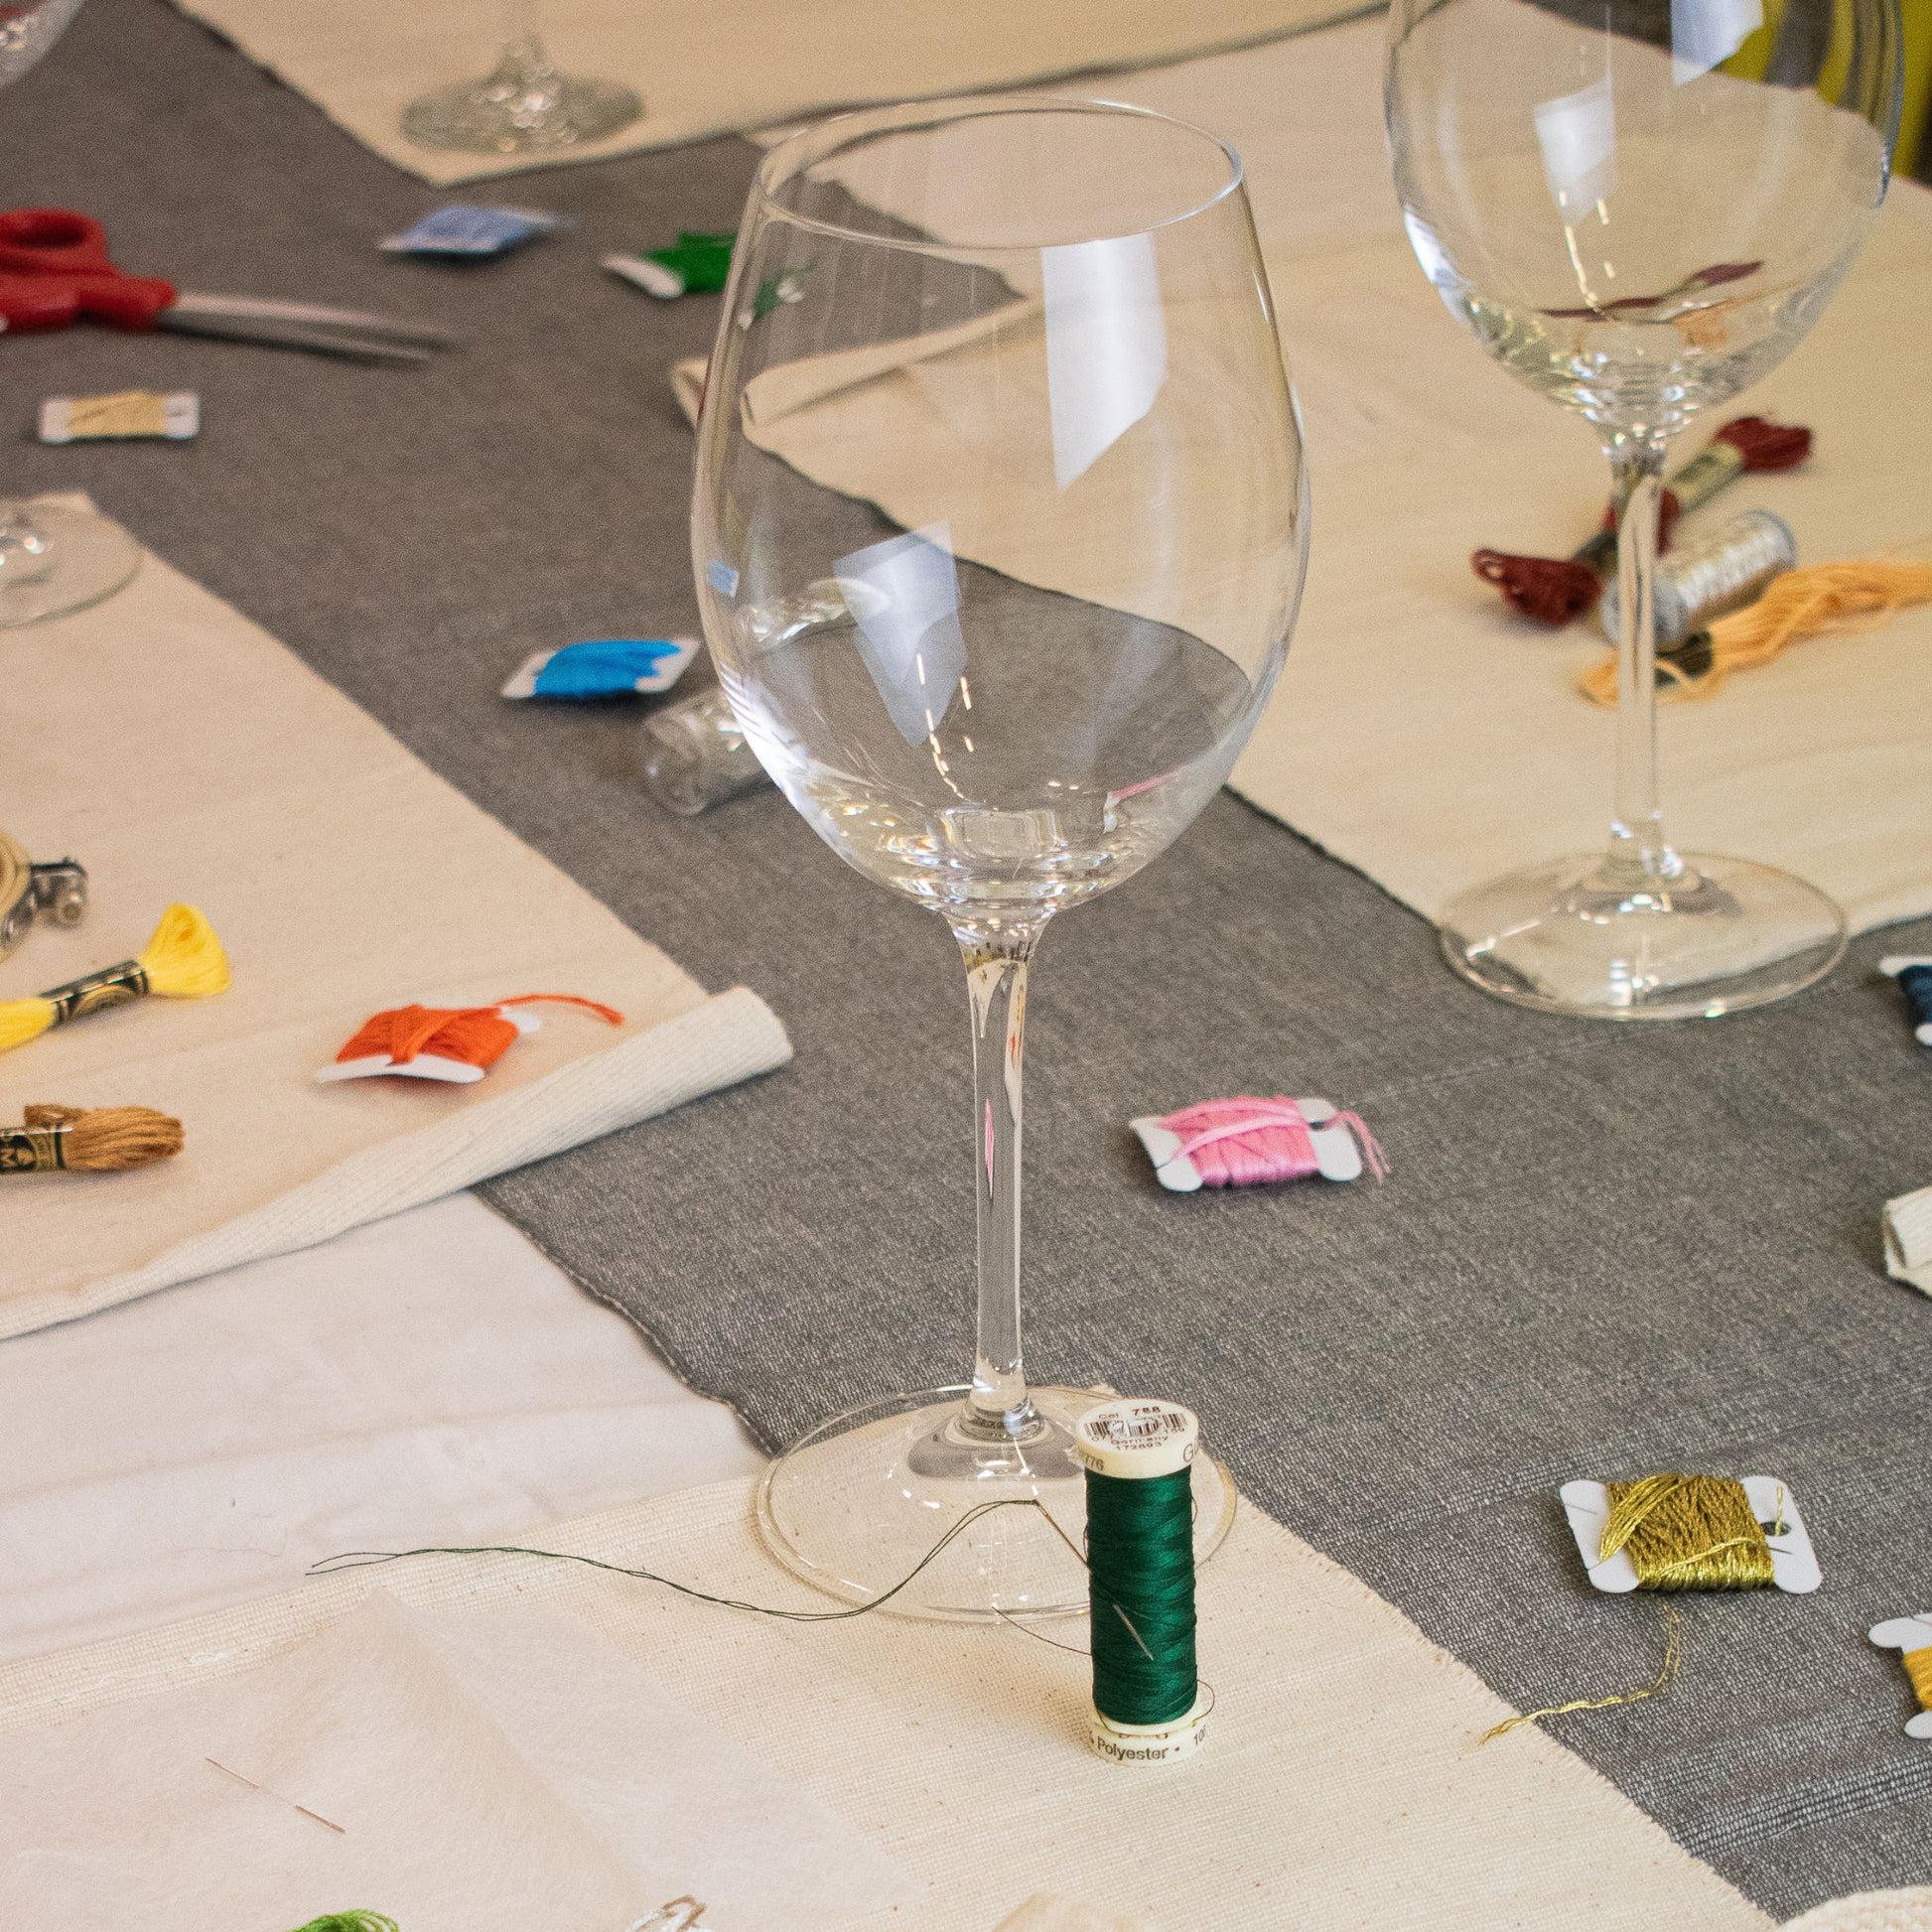 A craft non-alcoholic event at Knyota Non-Alcoholic Drinks.